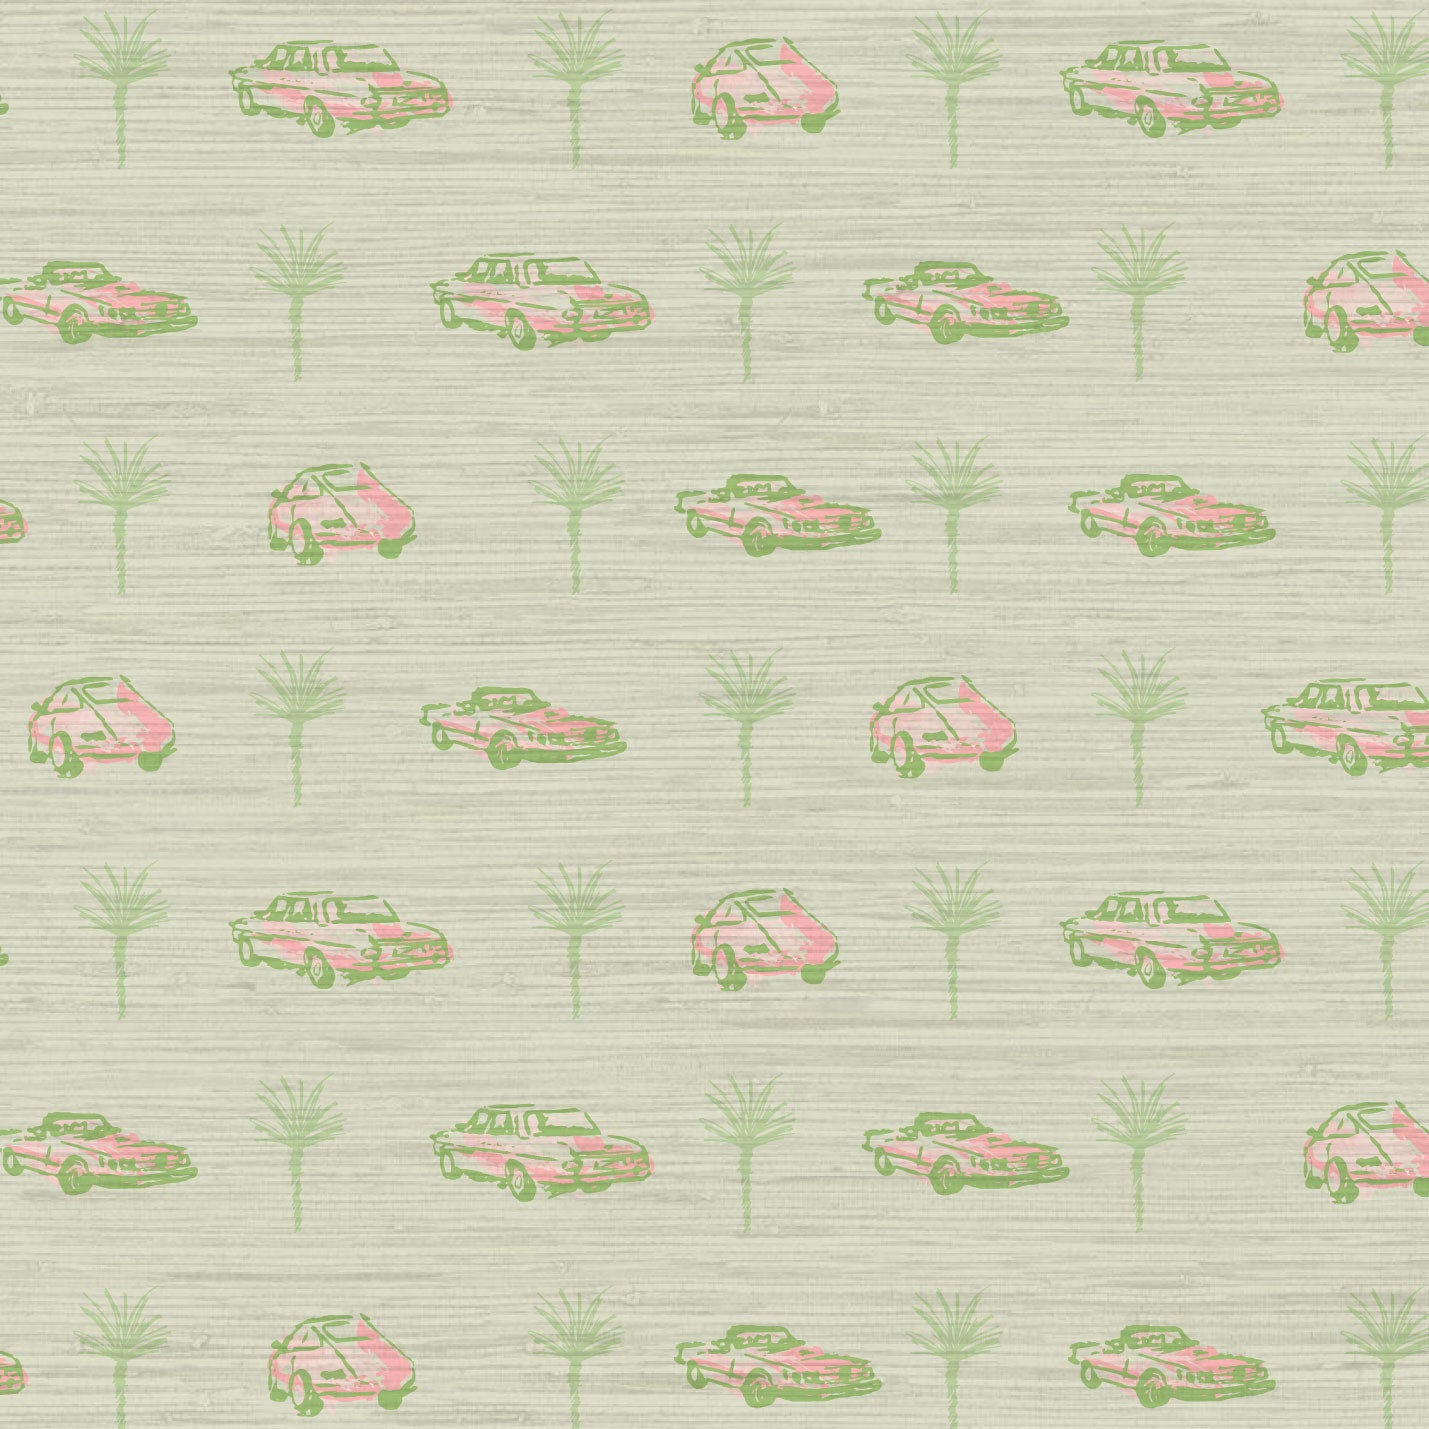 Grasscloth wallpaper Natural Textured Eco-Friendly Non-toxic High-quality  Sustainable Interior Design Bold Custom Tailor-made Retro chic Grand millennial Maximalism  Traditional Dopamine decor tropical palm tree mercedes bmw porsche mini icon vertical grid stripe kid playroom sage mint green neon coral pink 